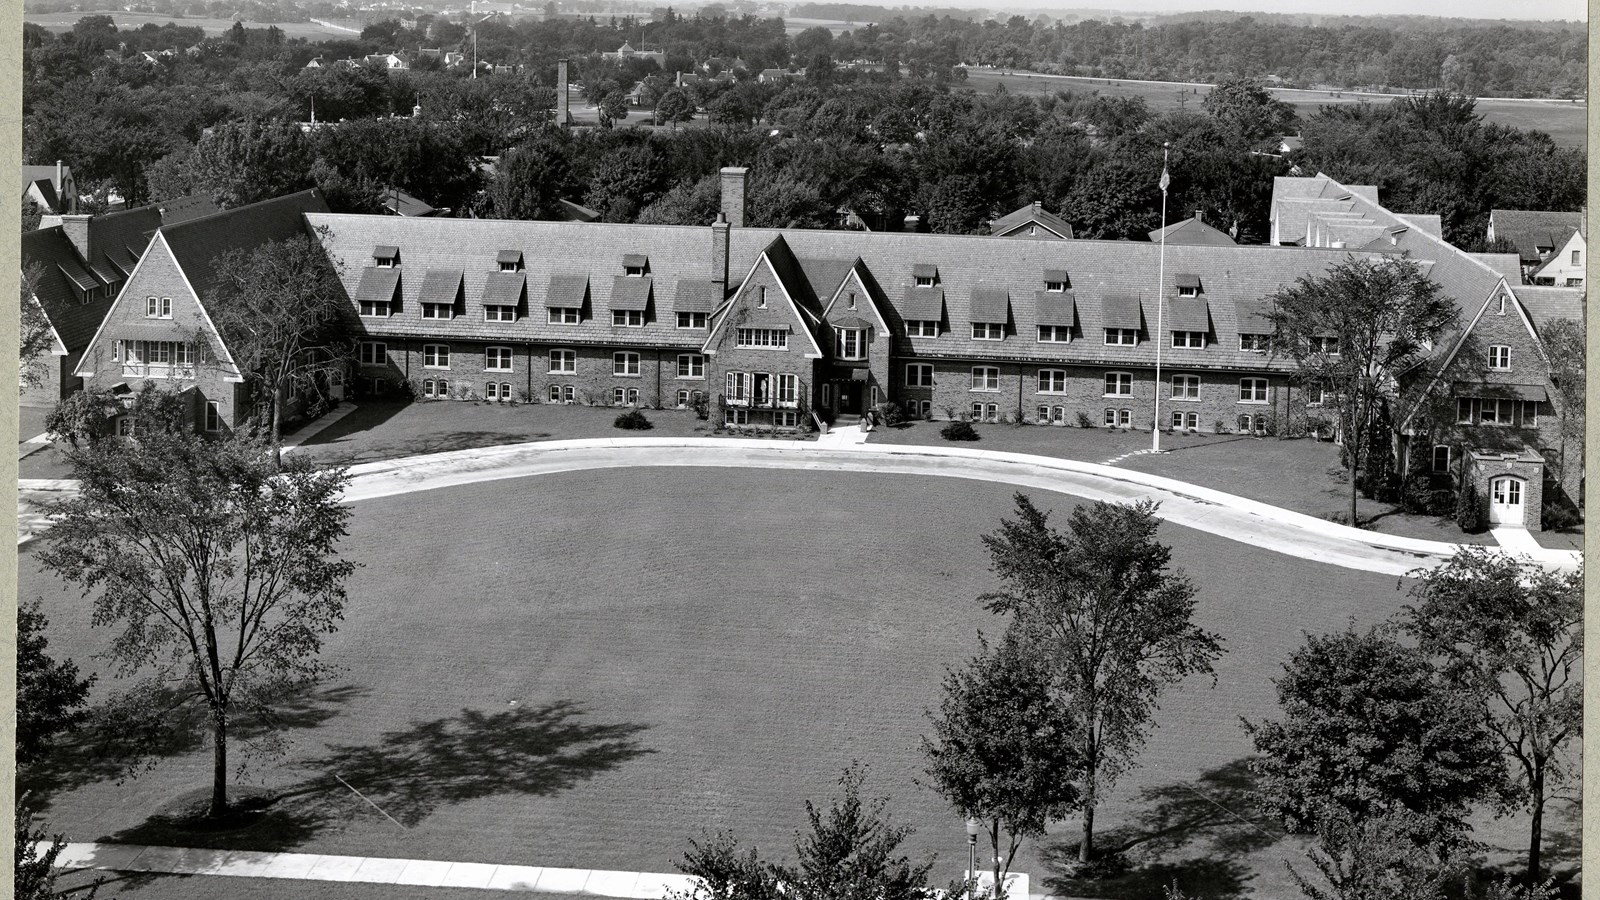 Black and white aerial of large building with grassy area in front, trees around